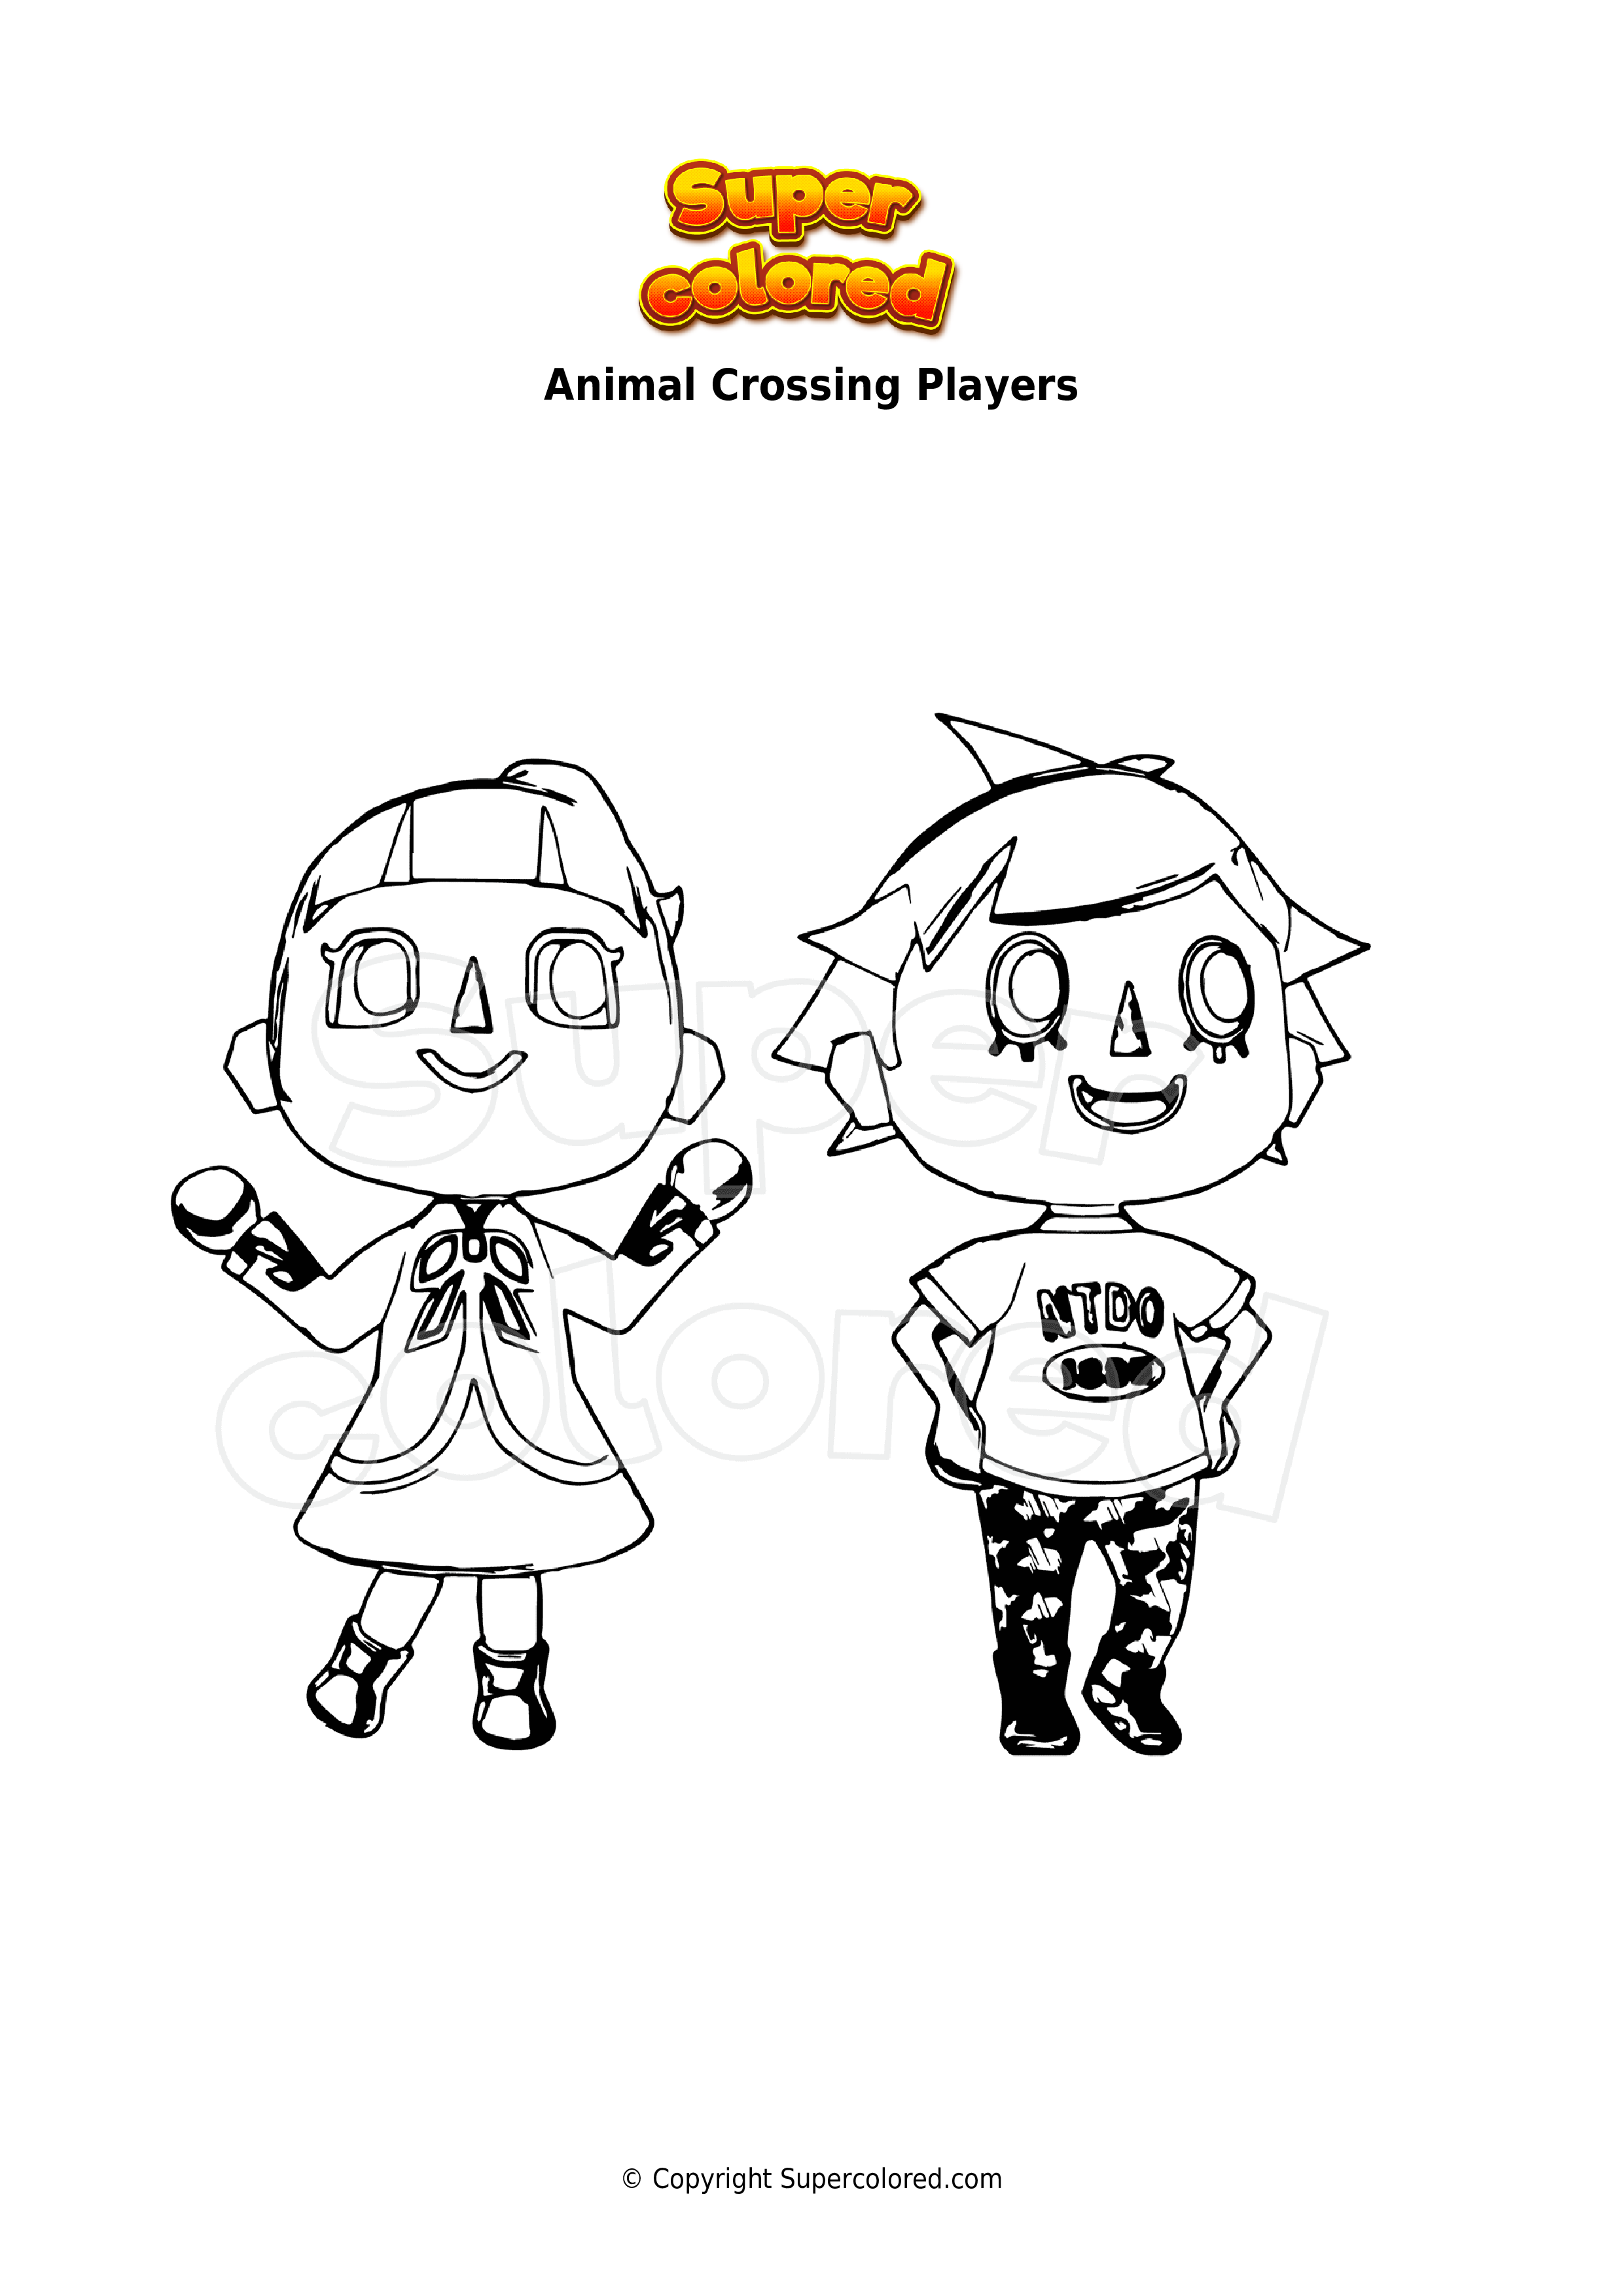 Coloring Pages   Animal Crossing   Supercolored